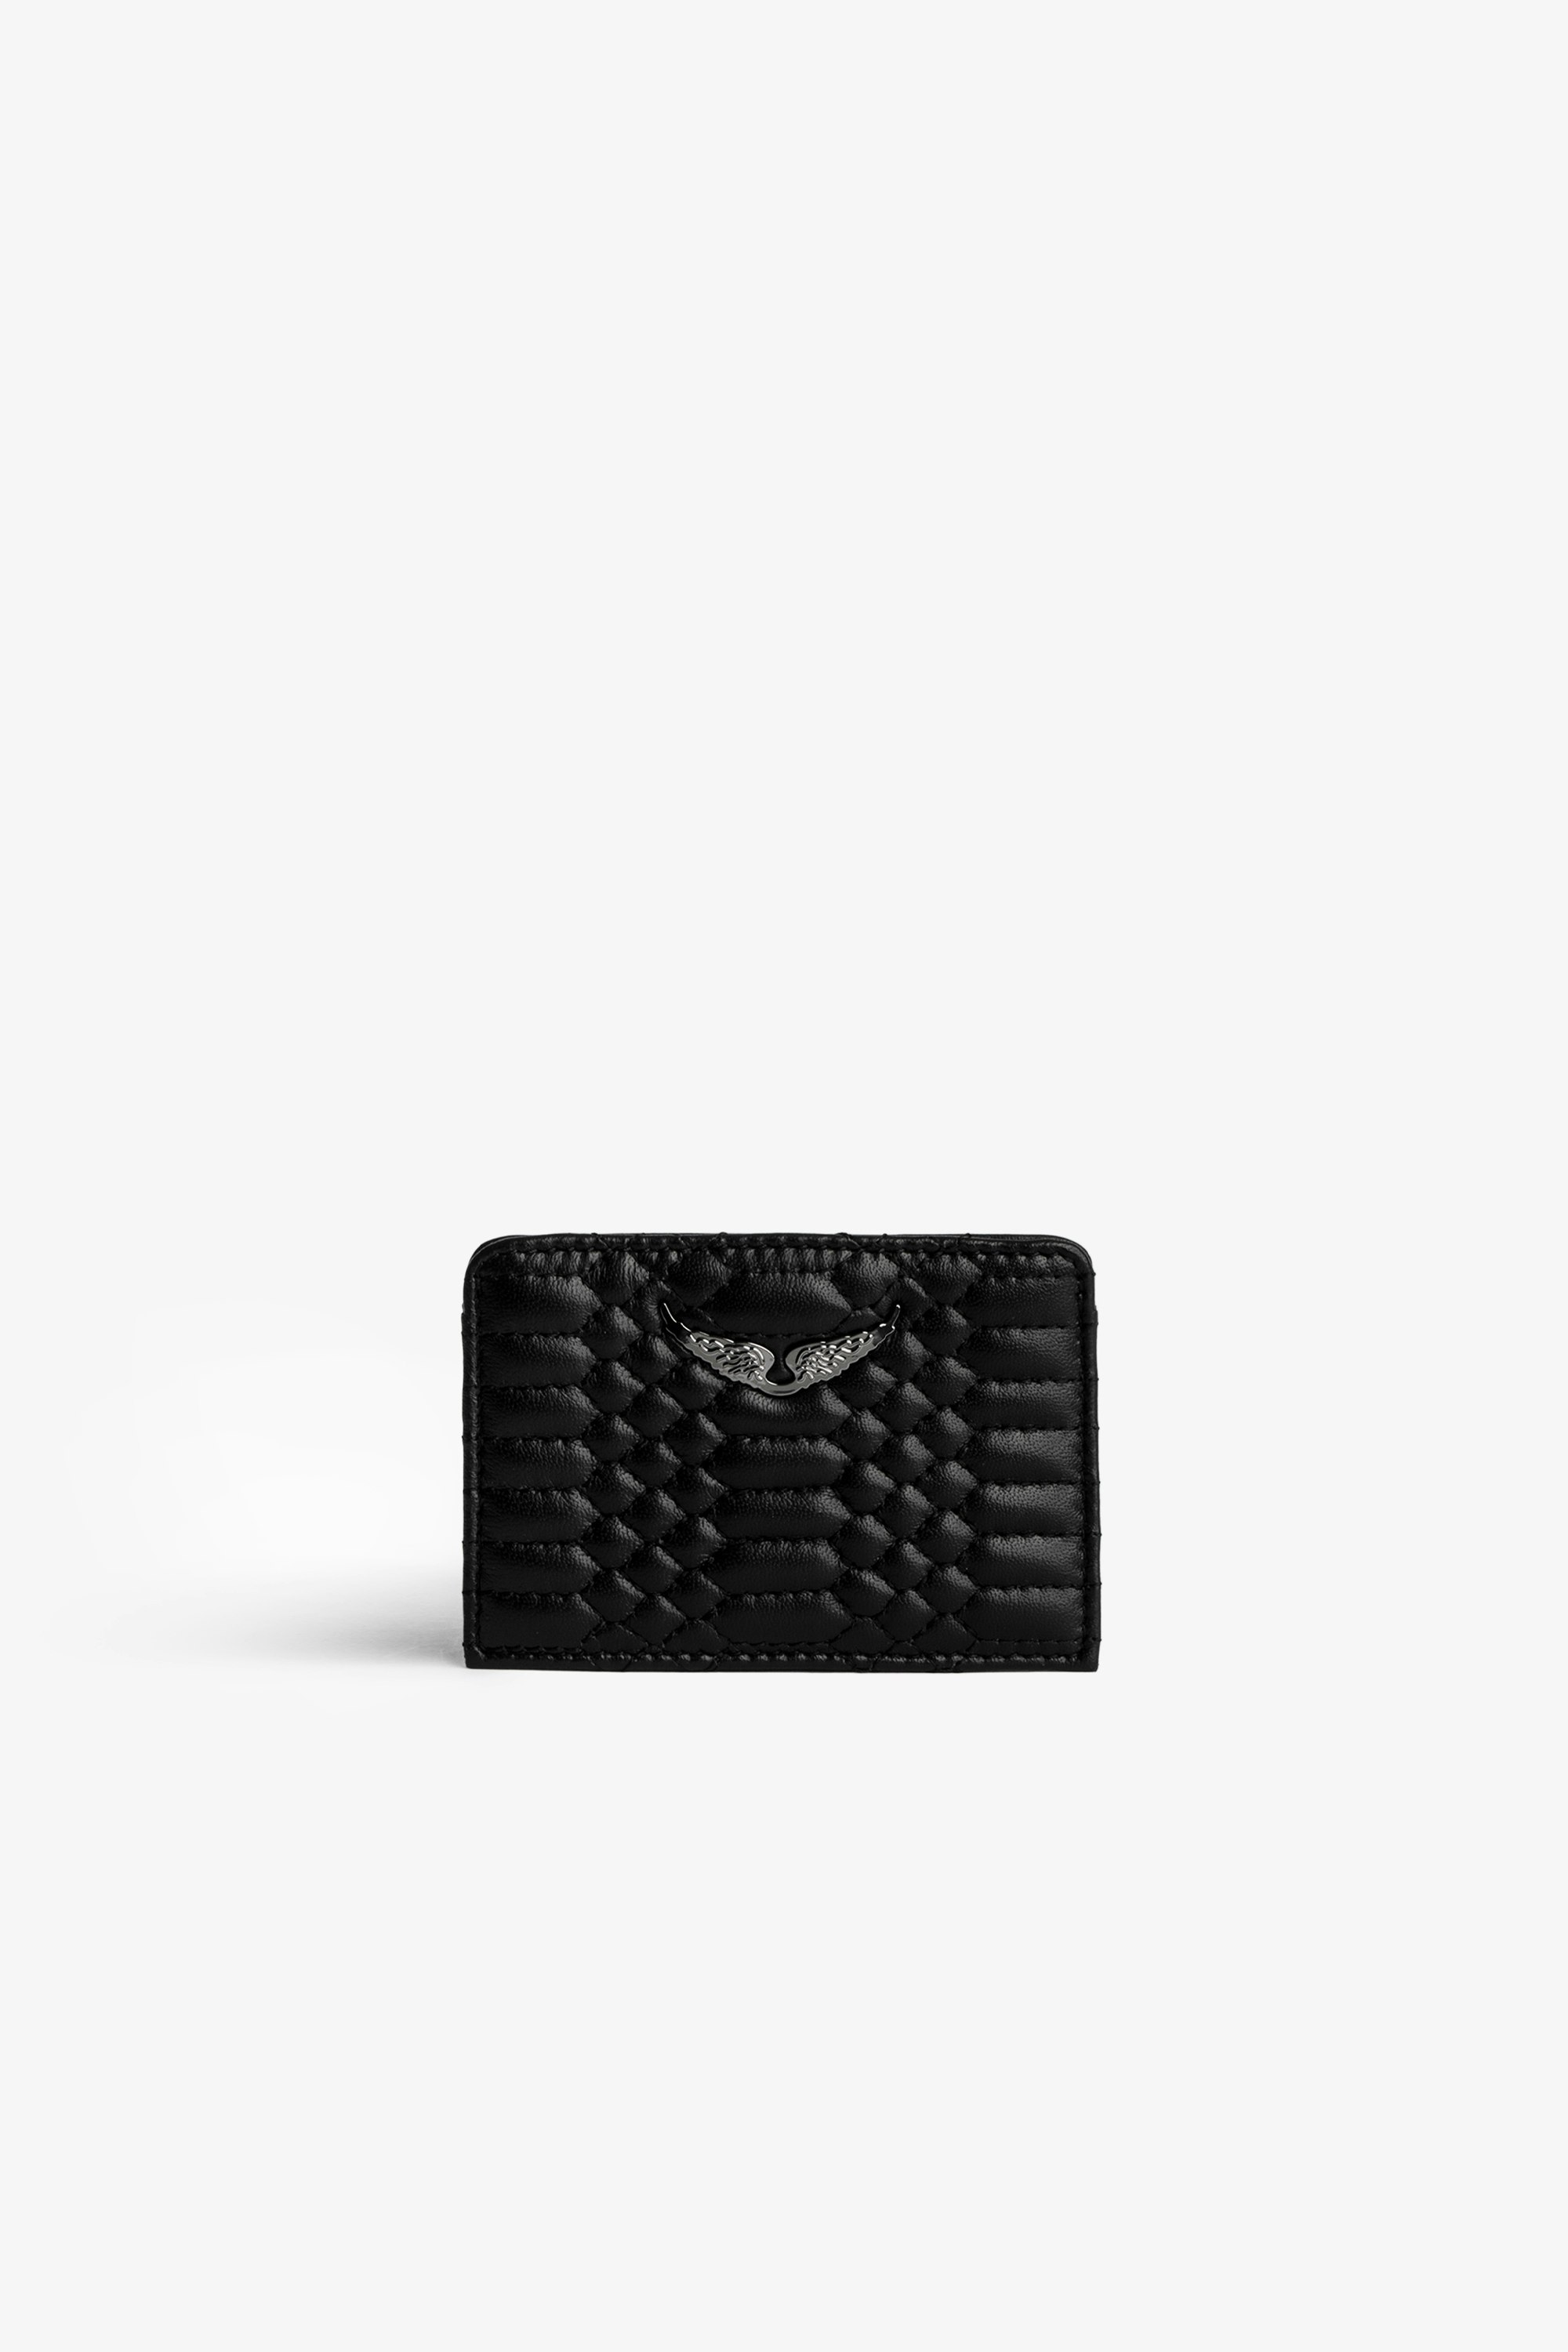 ZV Pass Card Holder - Women's matte black quilted leather card holder